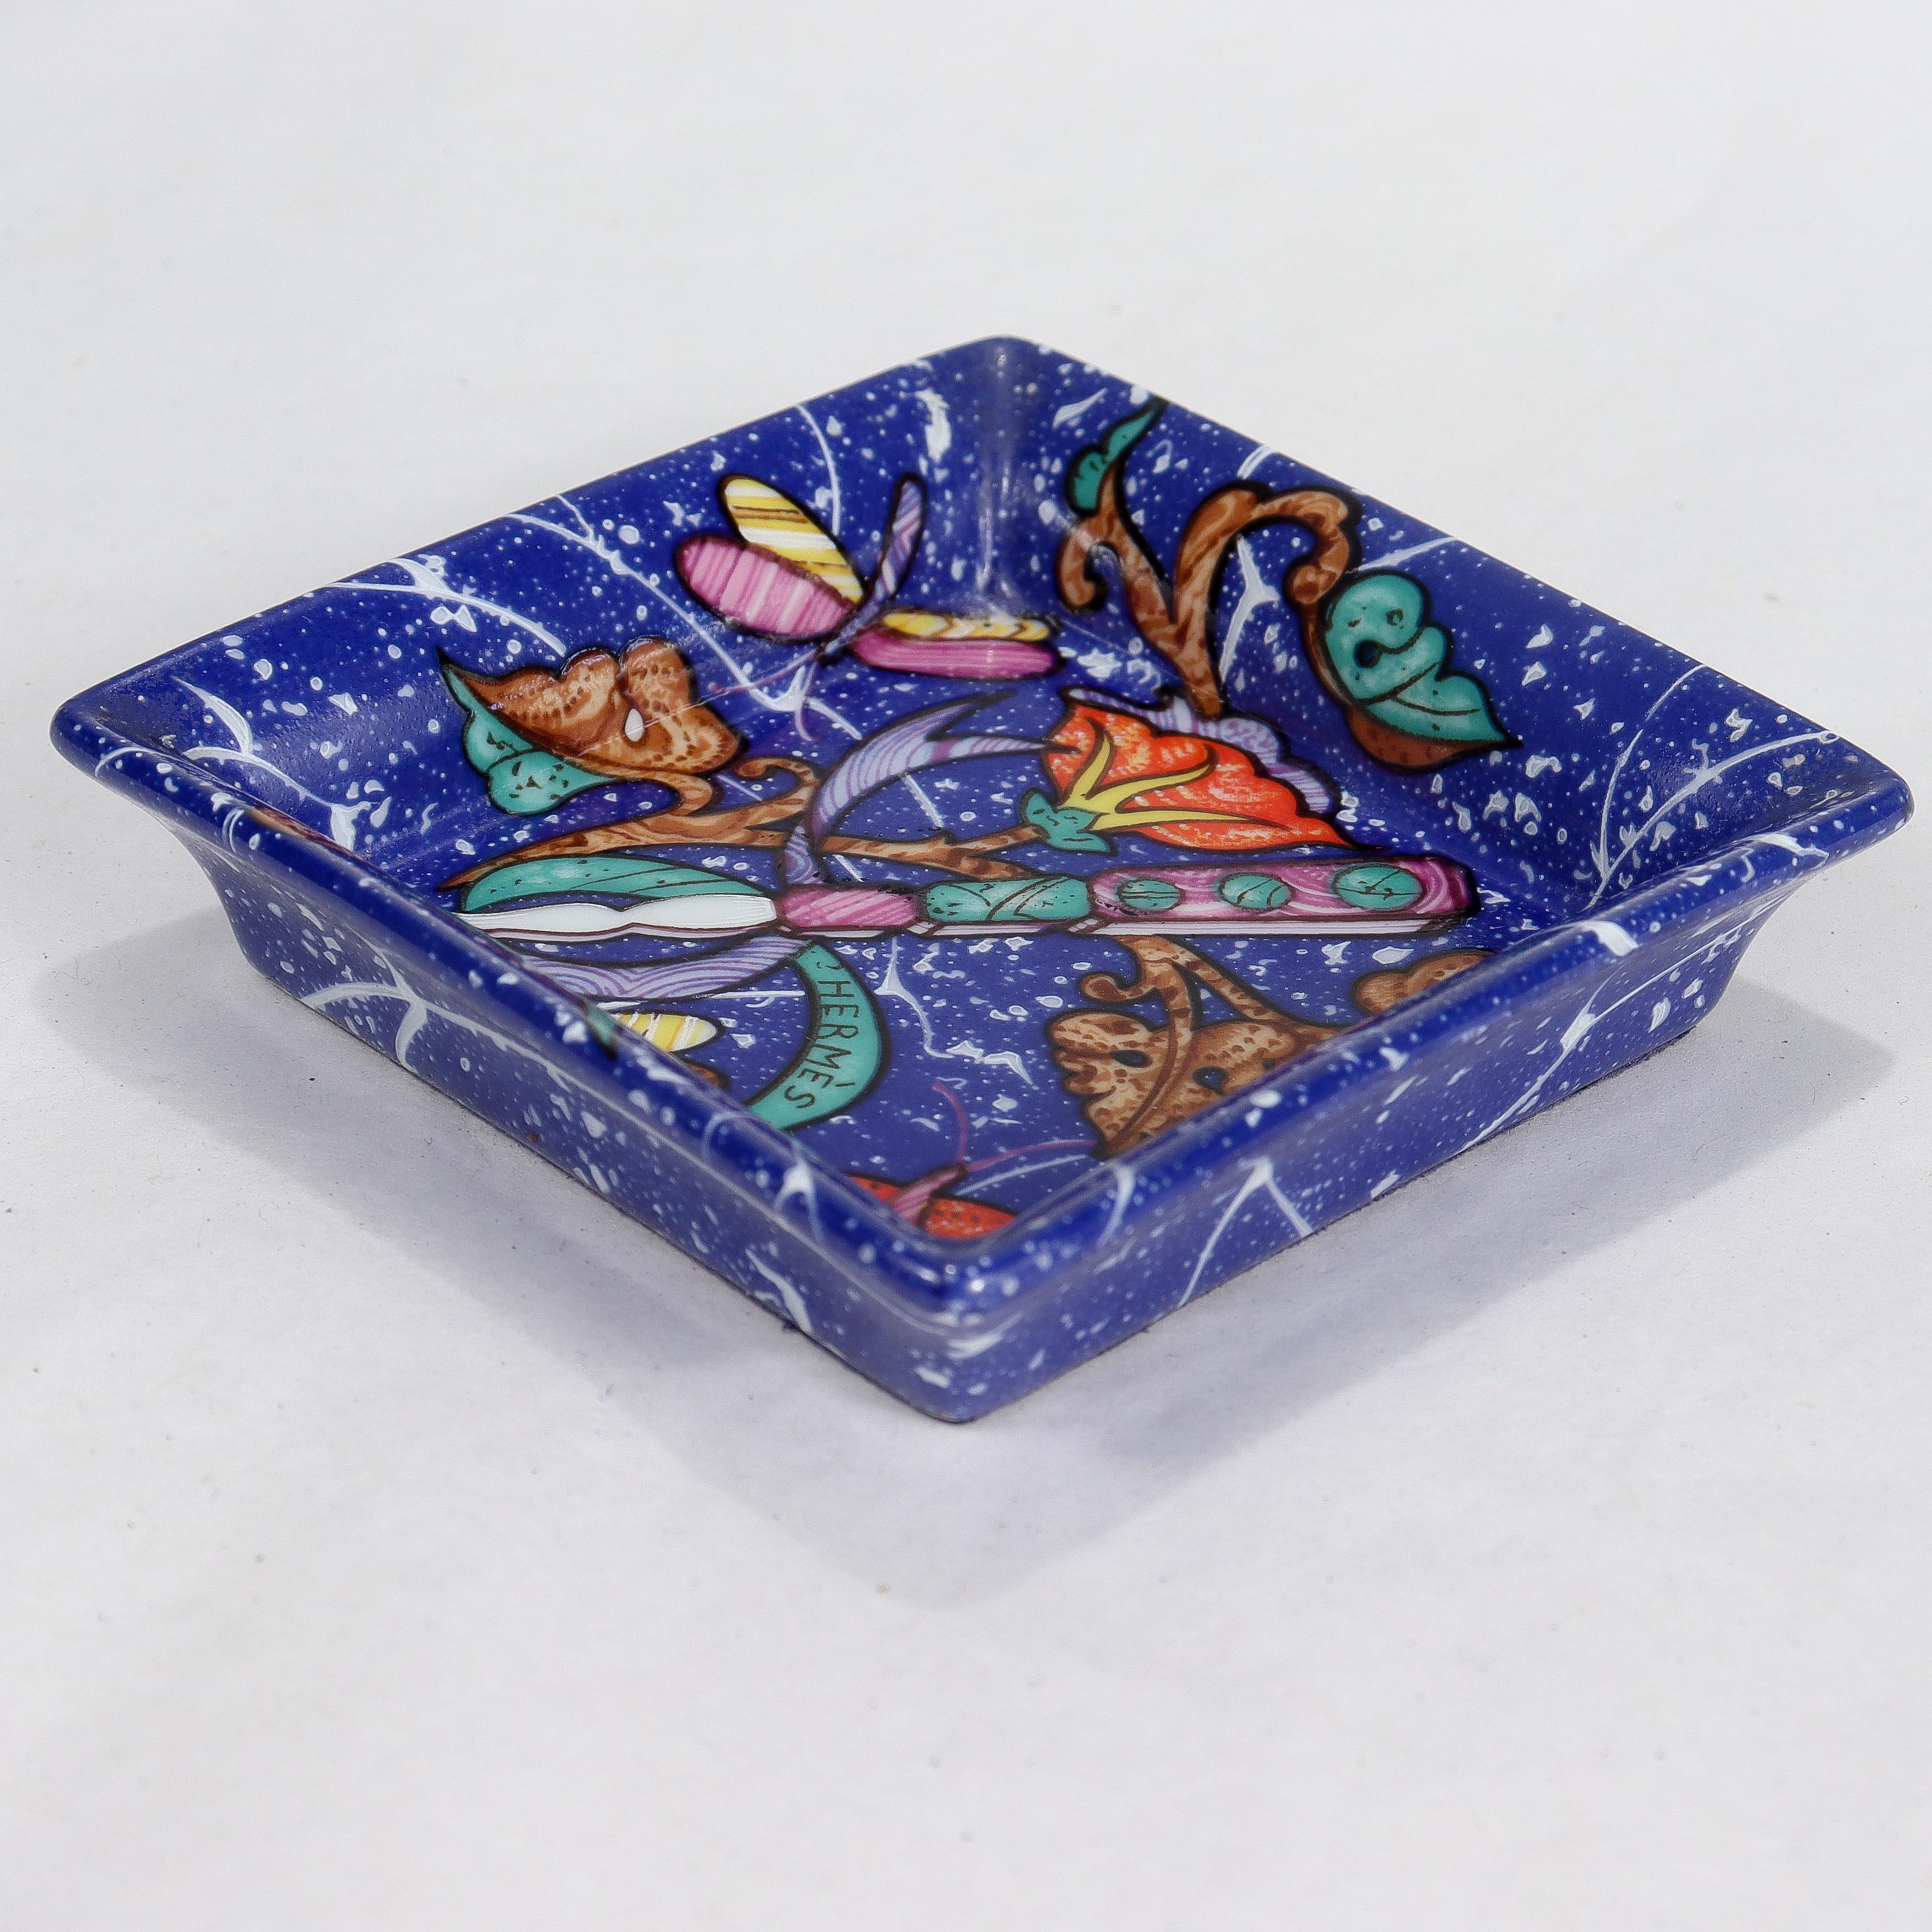 A fine porcelain small square dish.

By Limoges for Hermes Paris. 

In the Marqueterie de Pierre d'Orient et d'Occident Blue pattern.

With blue felt to the base that is marked with Hermes makers mark / Porcelain / Limoges / Made in France.

Simply